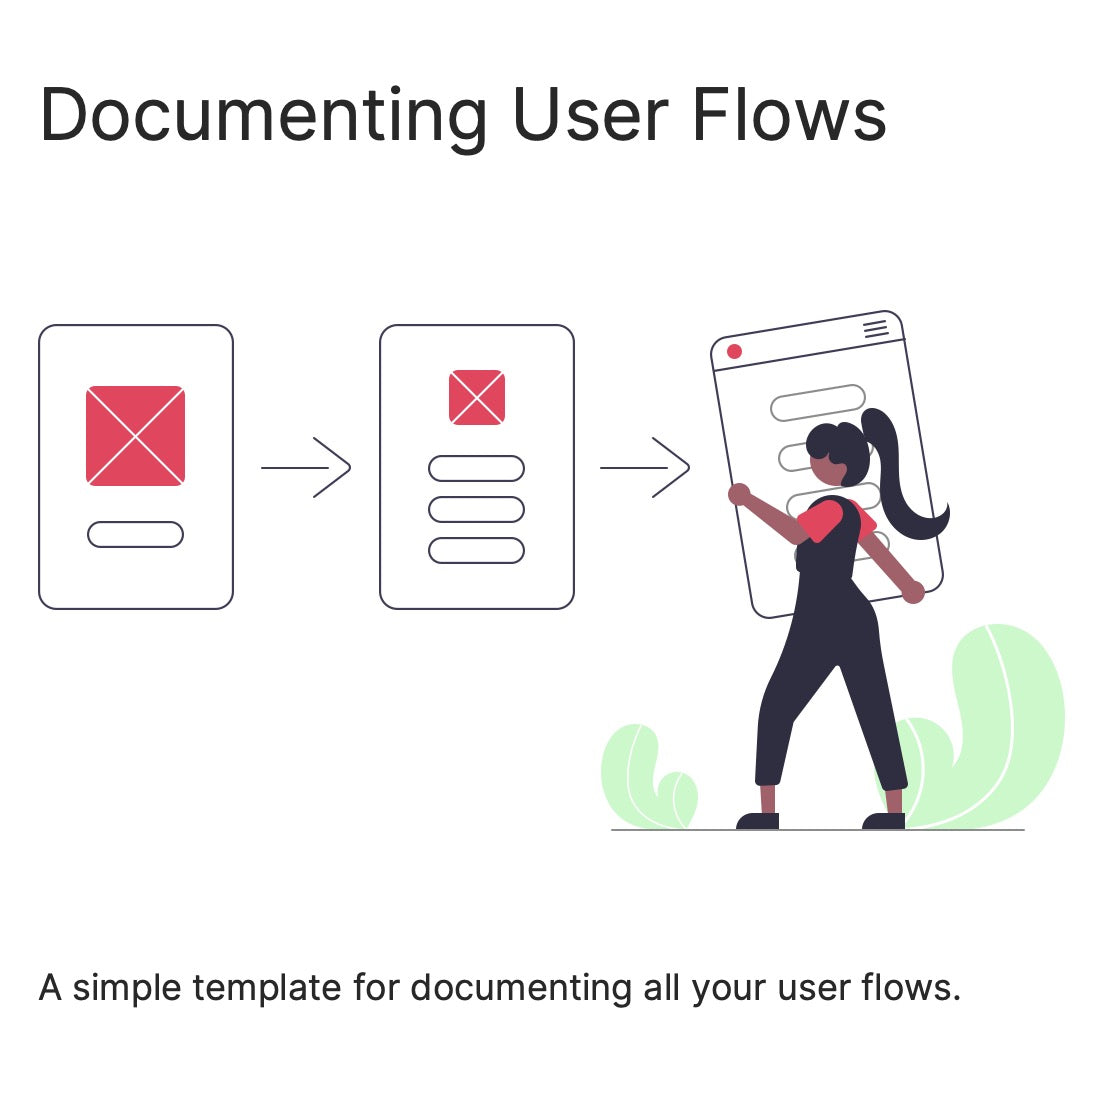 Documenting User Flows